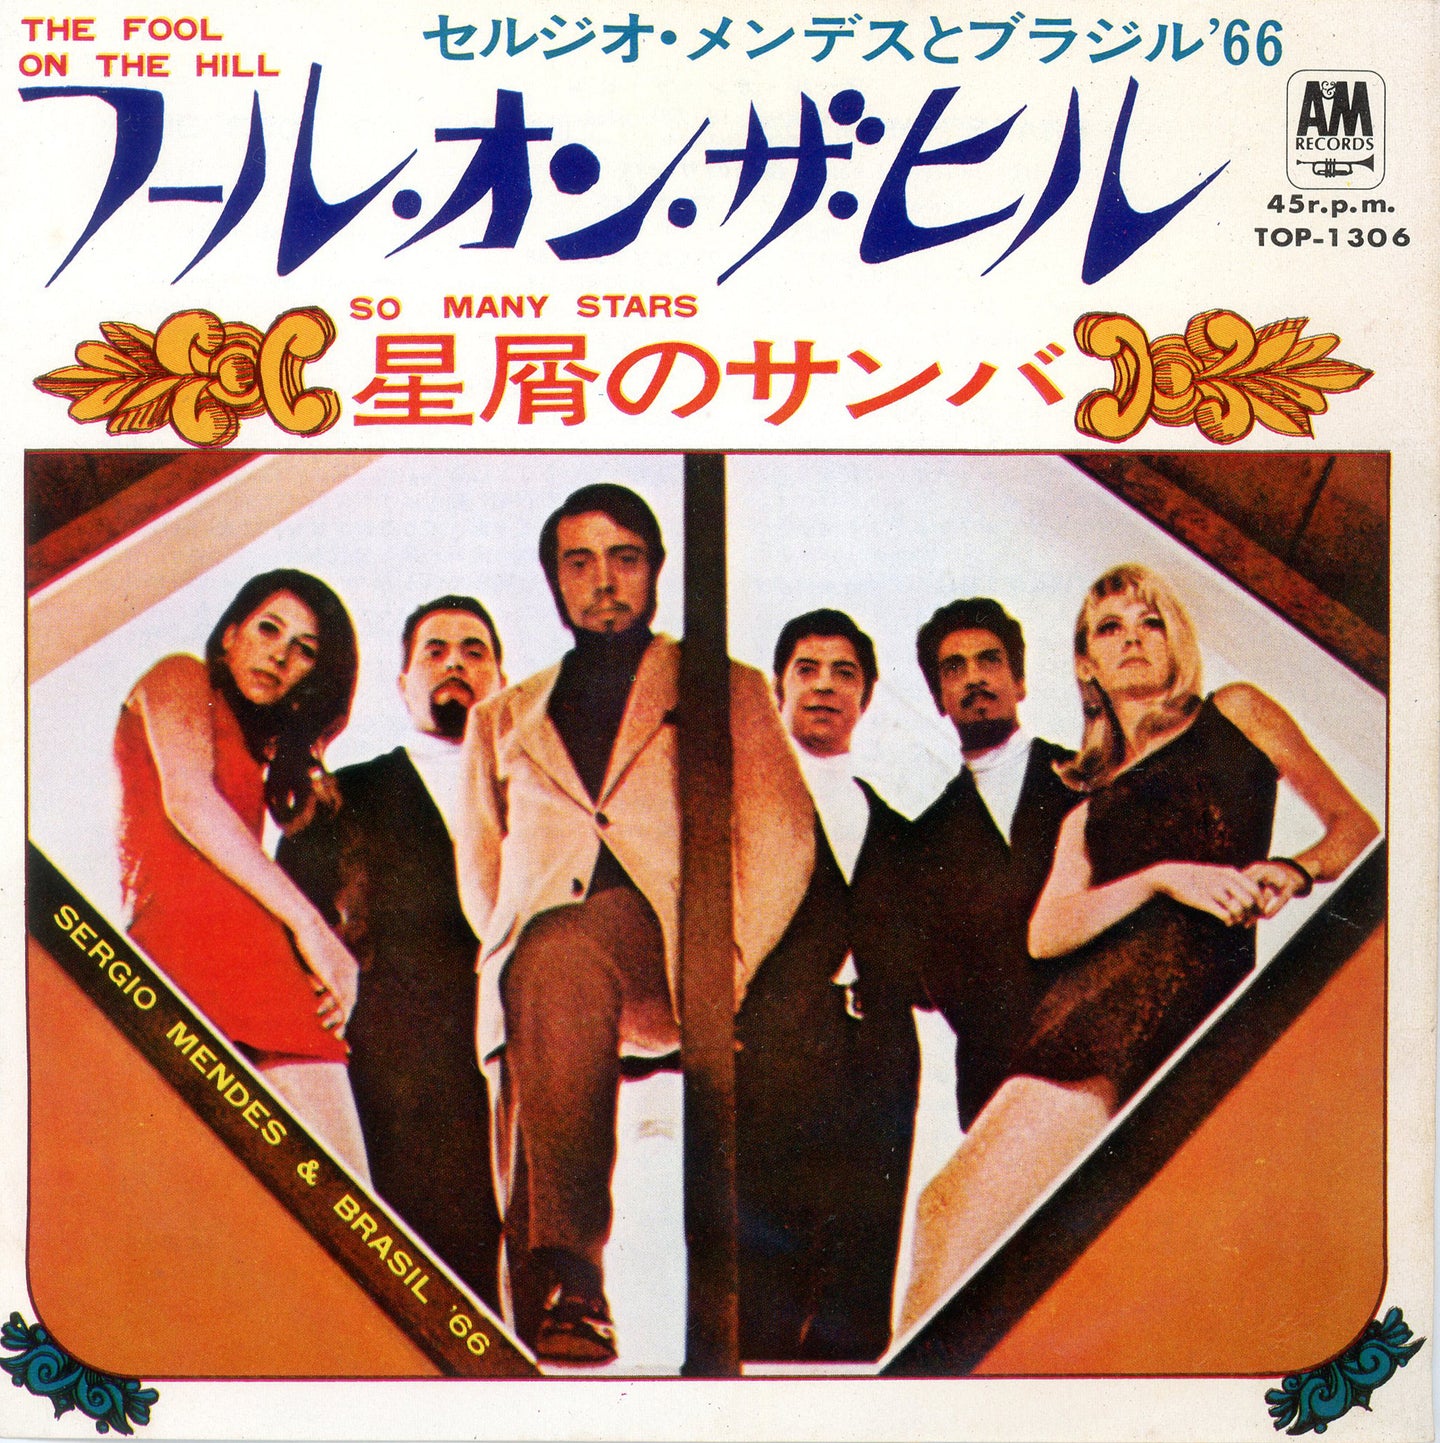 Sergio Mendes - Fool On The Hill / So Many Stars 7